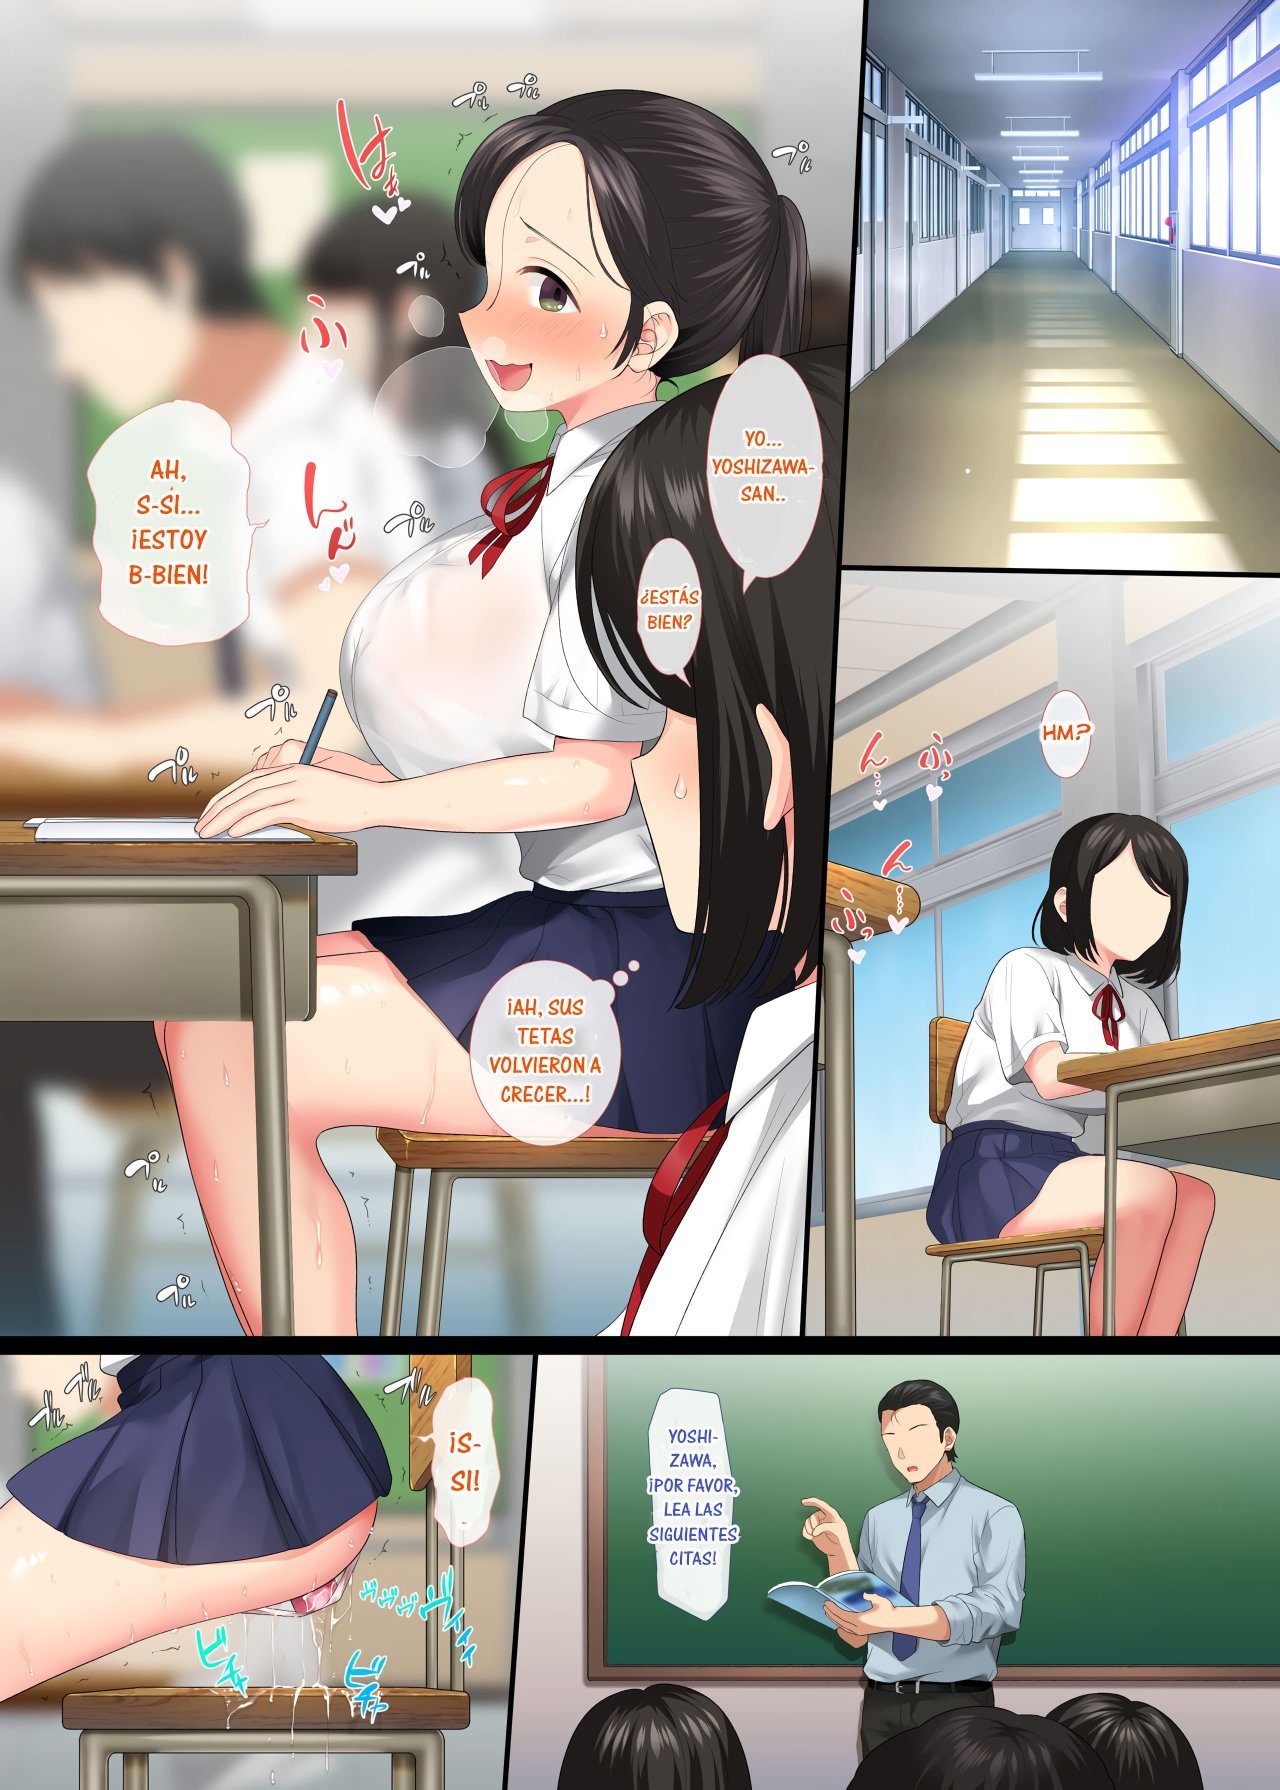 INTROVERTED BEAUTY GETS RAPED OVER AND OVER BY HER HOMEROOM TEACHER 3 - FINAL - 36